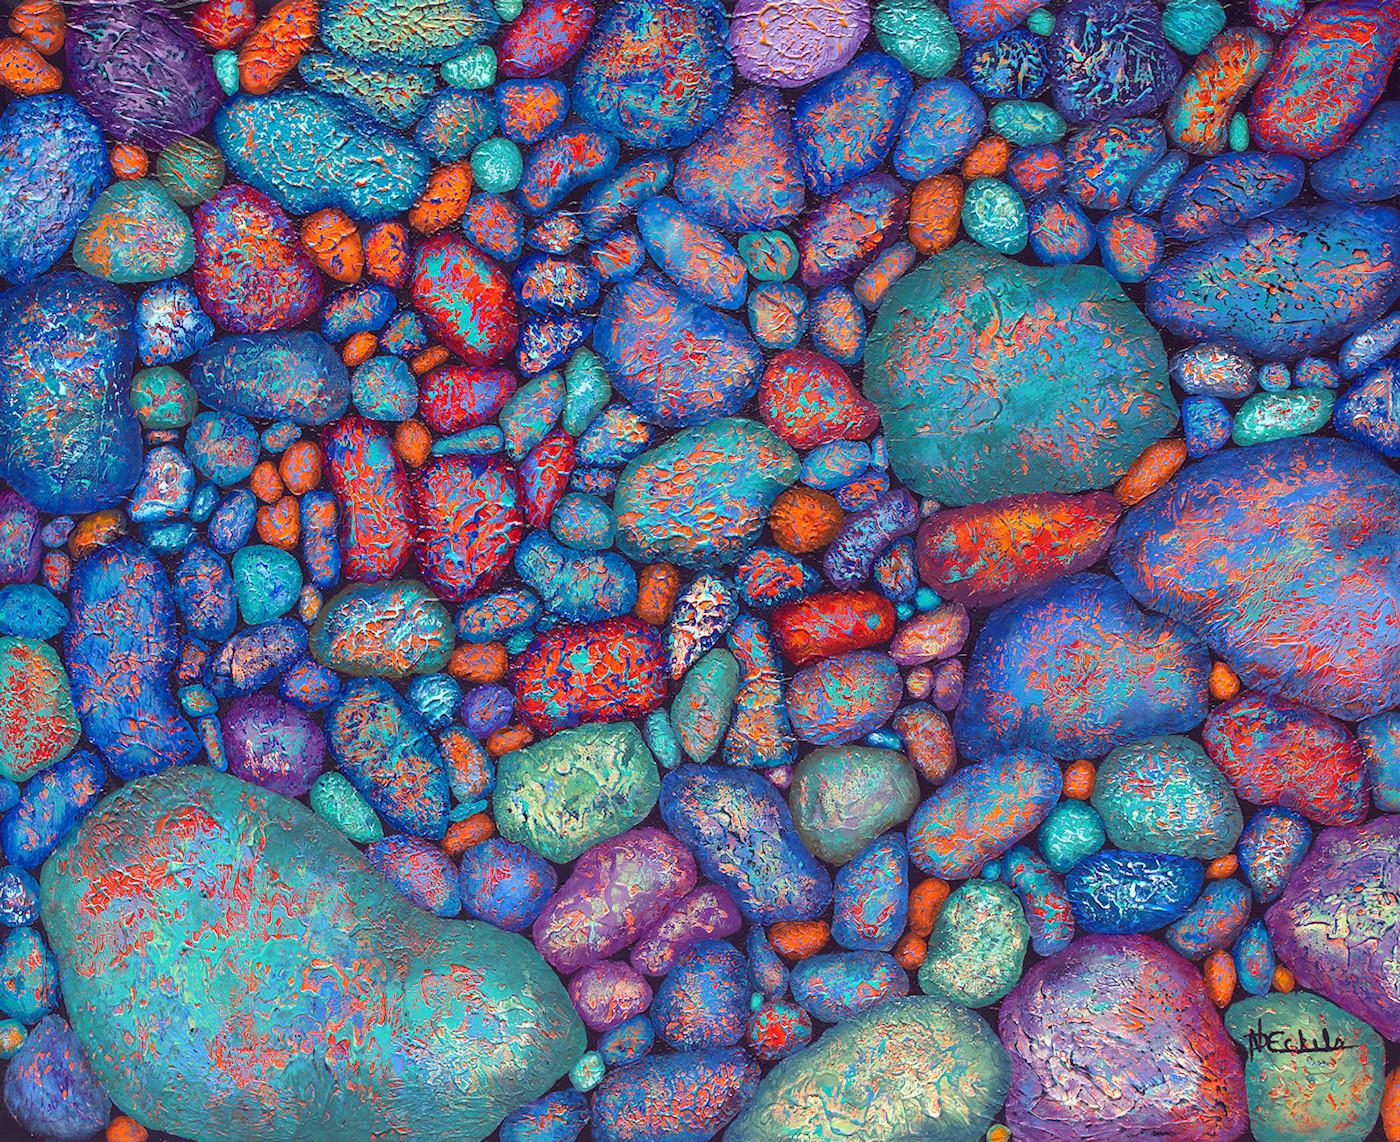 " A Few Red Fancy Rocks" abstract with textural purples, blues, red and aqua - Mixed Media Art by Nancy Eckels